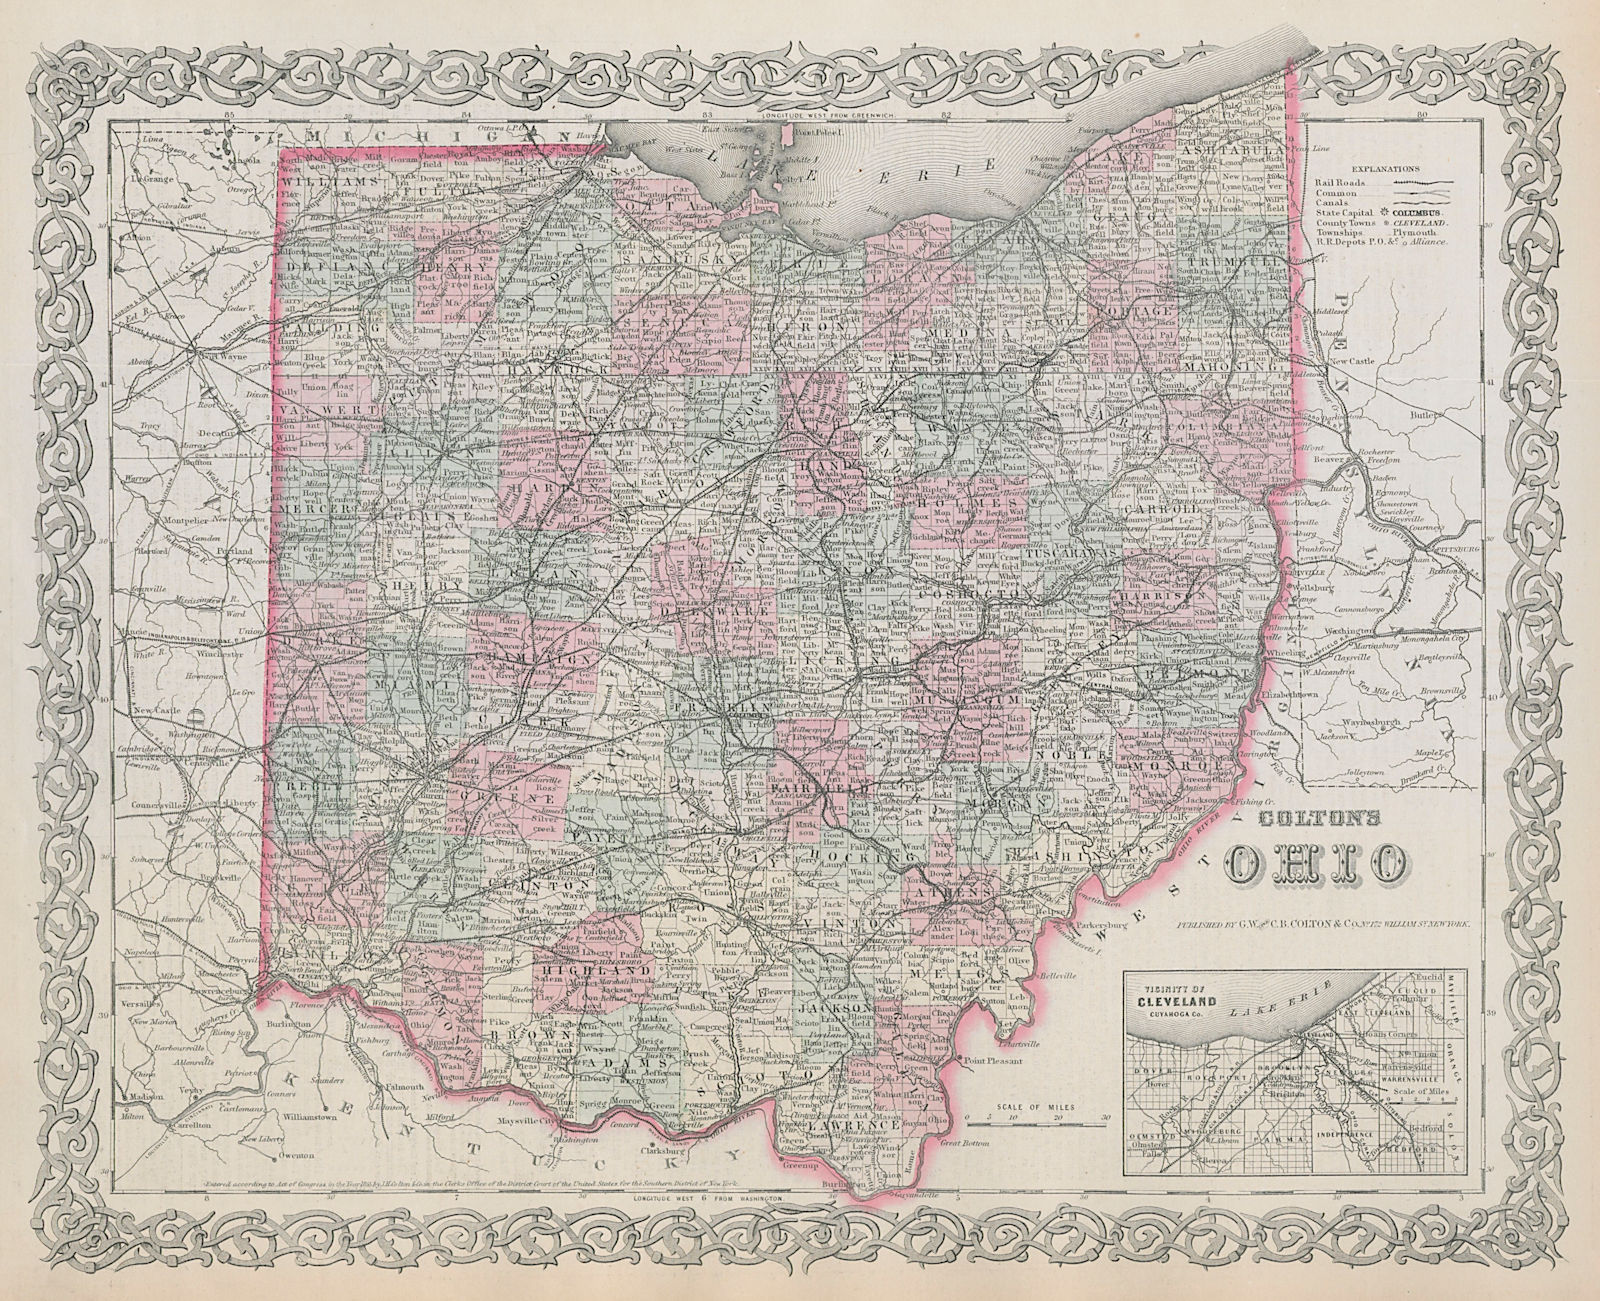 Associate Product Colton's Ohio. Decorative antique US state map. Cleveland 1869 old